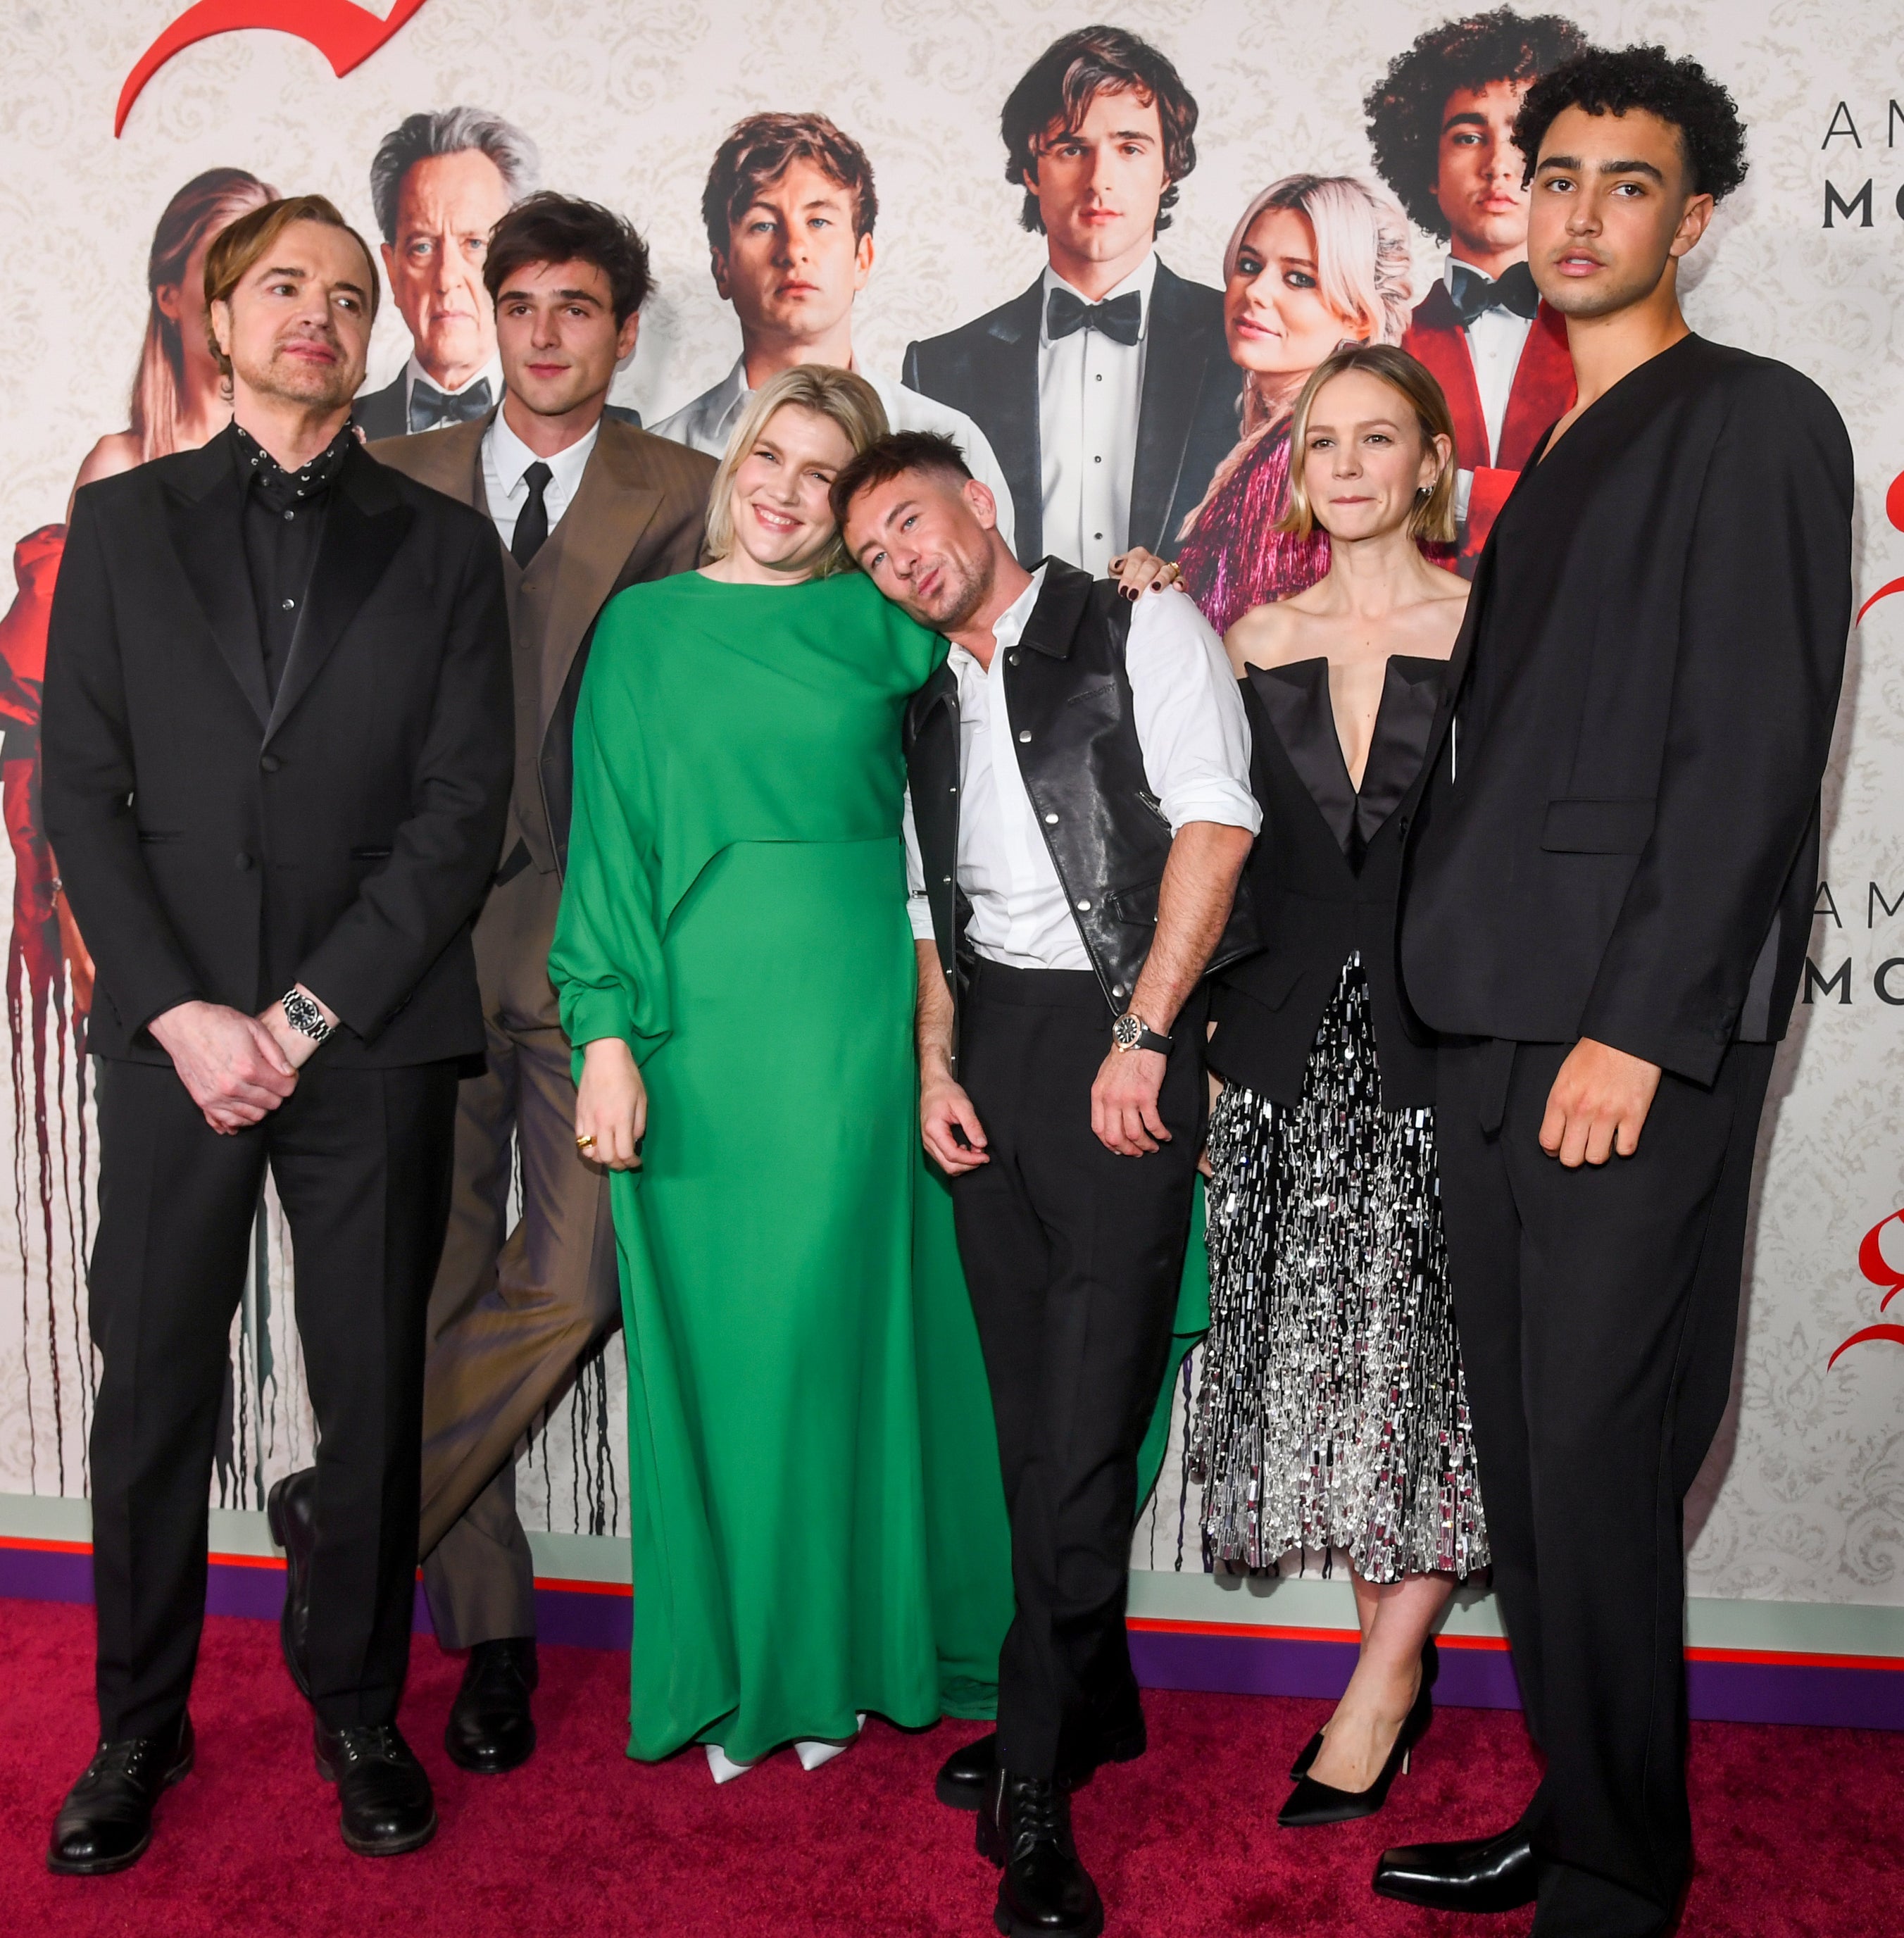 the cast on the red carpet for the movie premiere